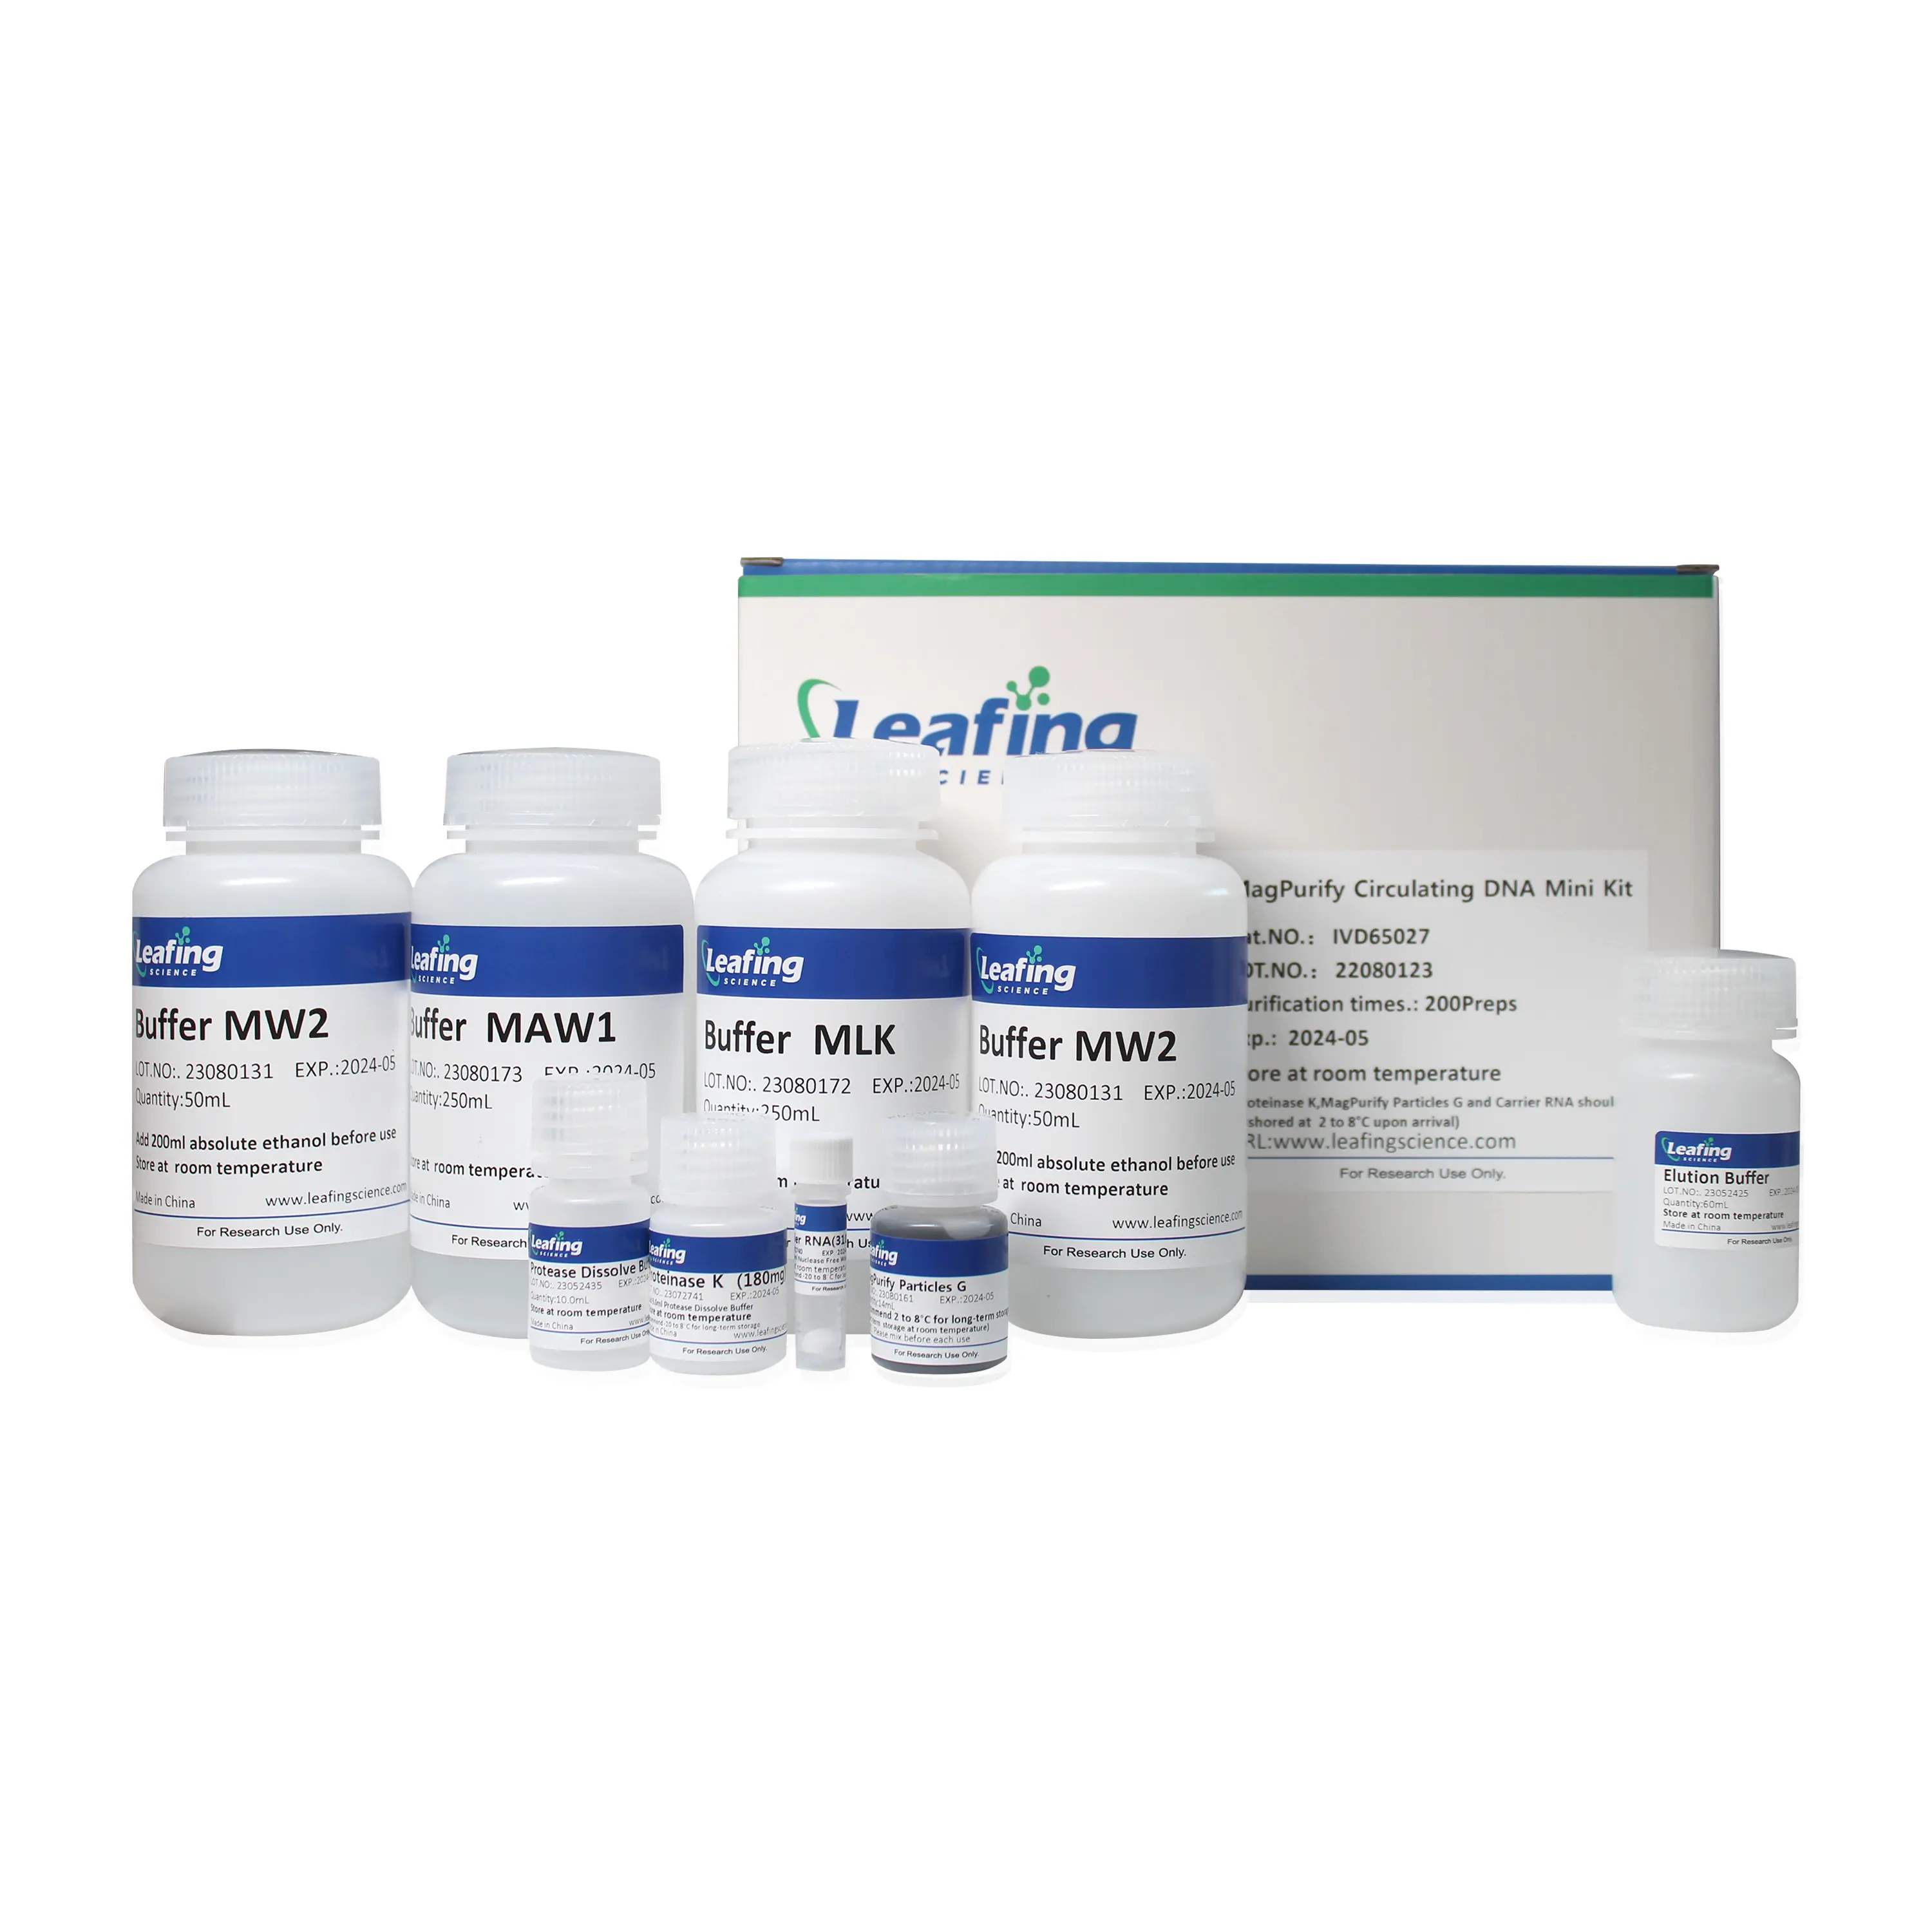 MagPure Circulating DNA Mini Kit is designed for purification of high quality circulating DNA (cfDNA) fromcell-free body fluids